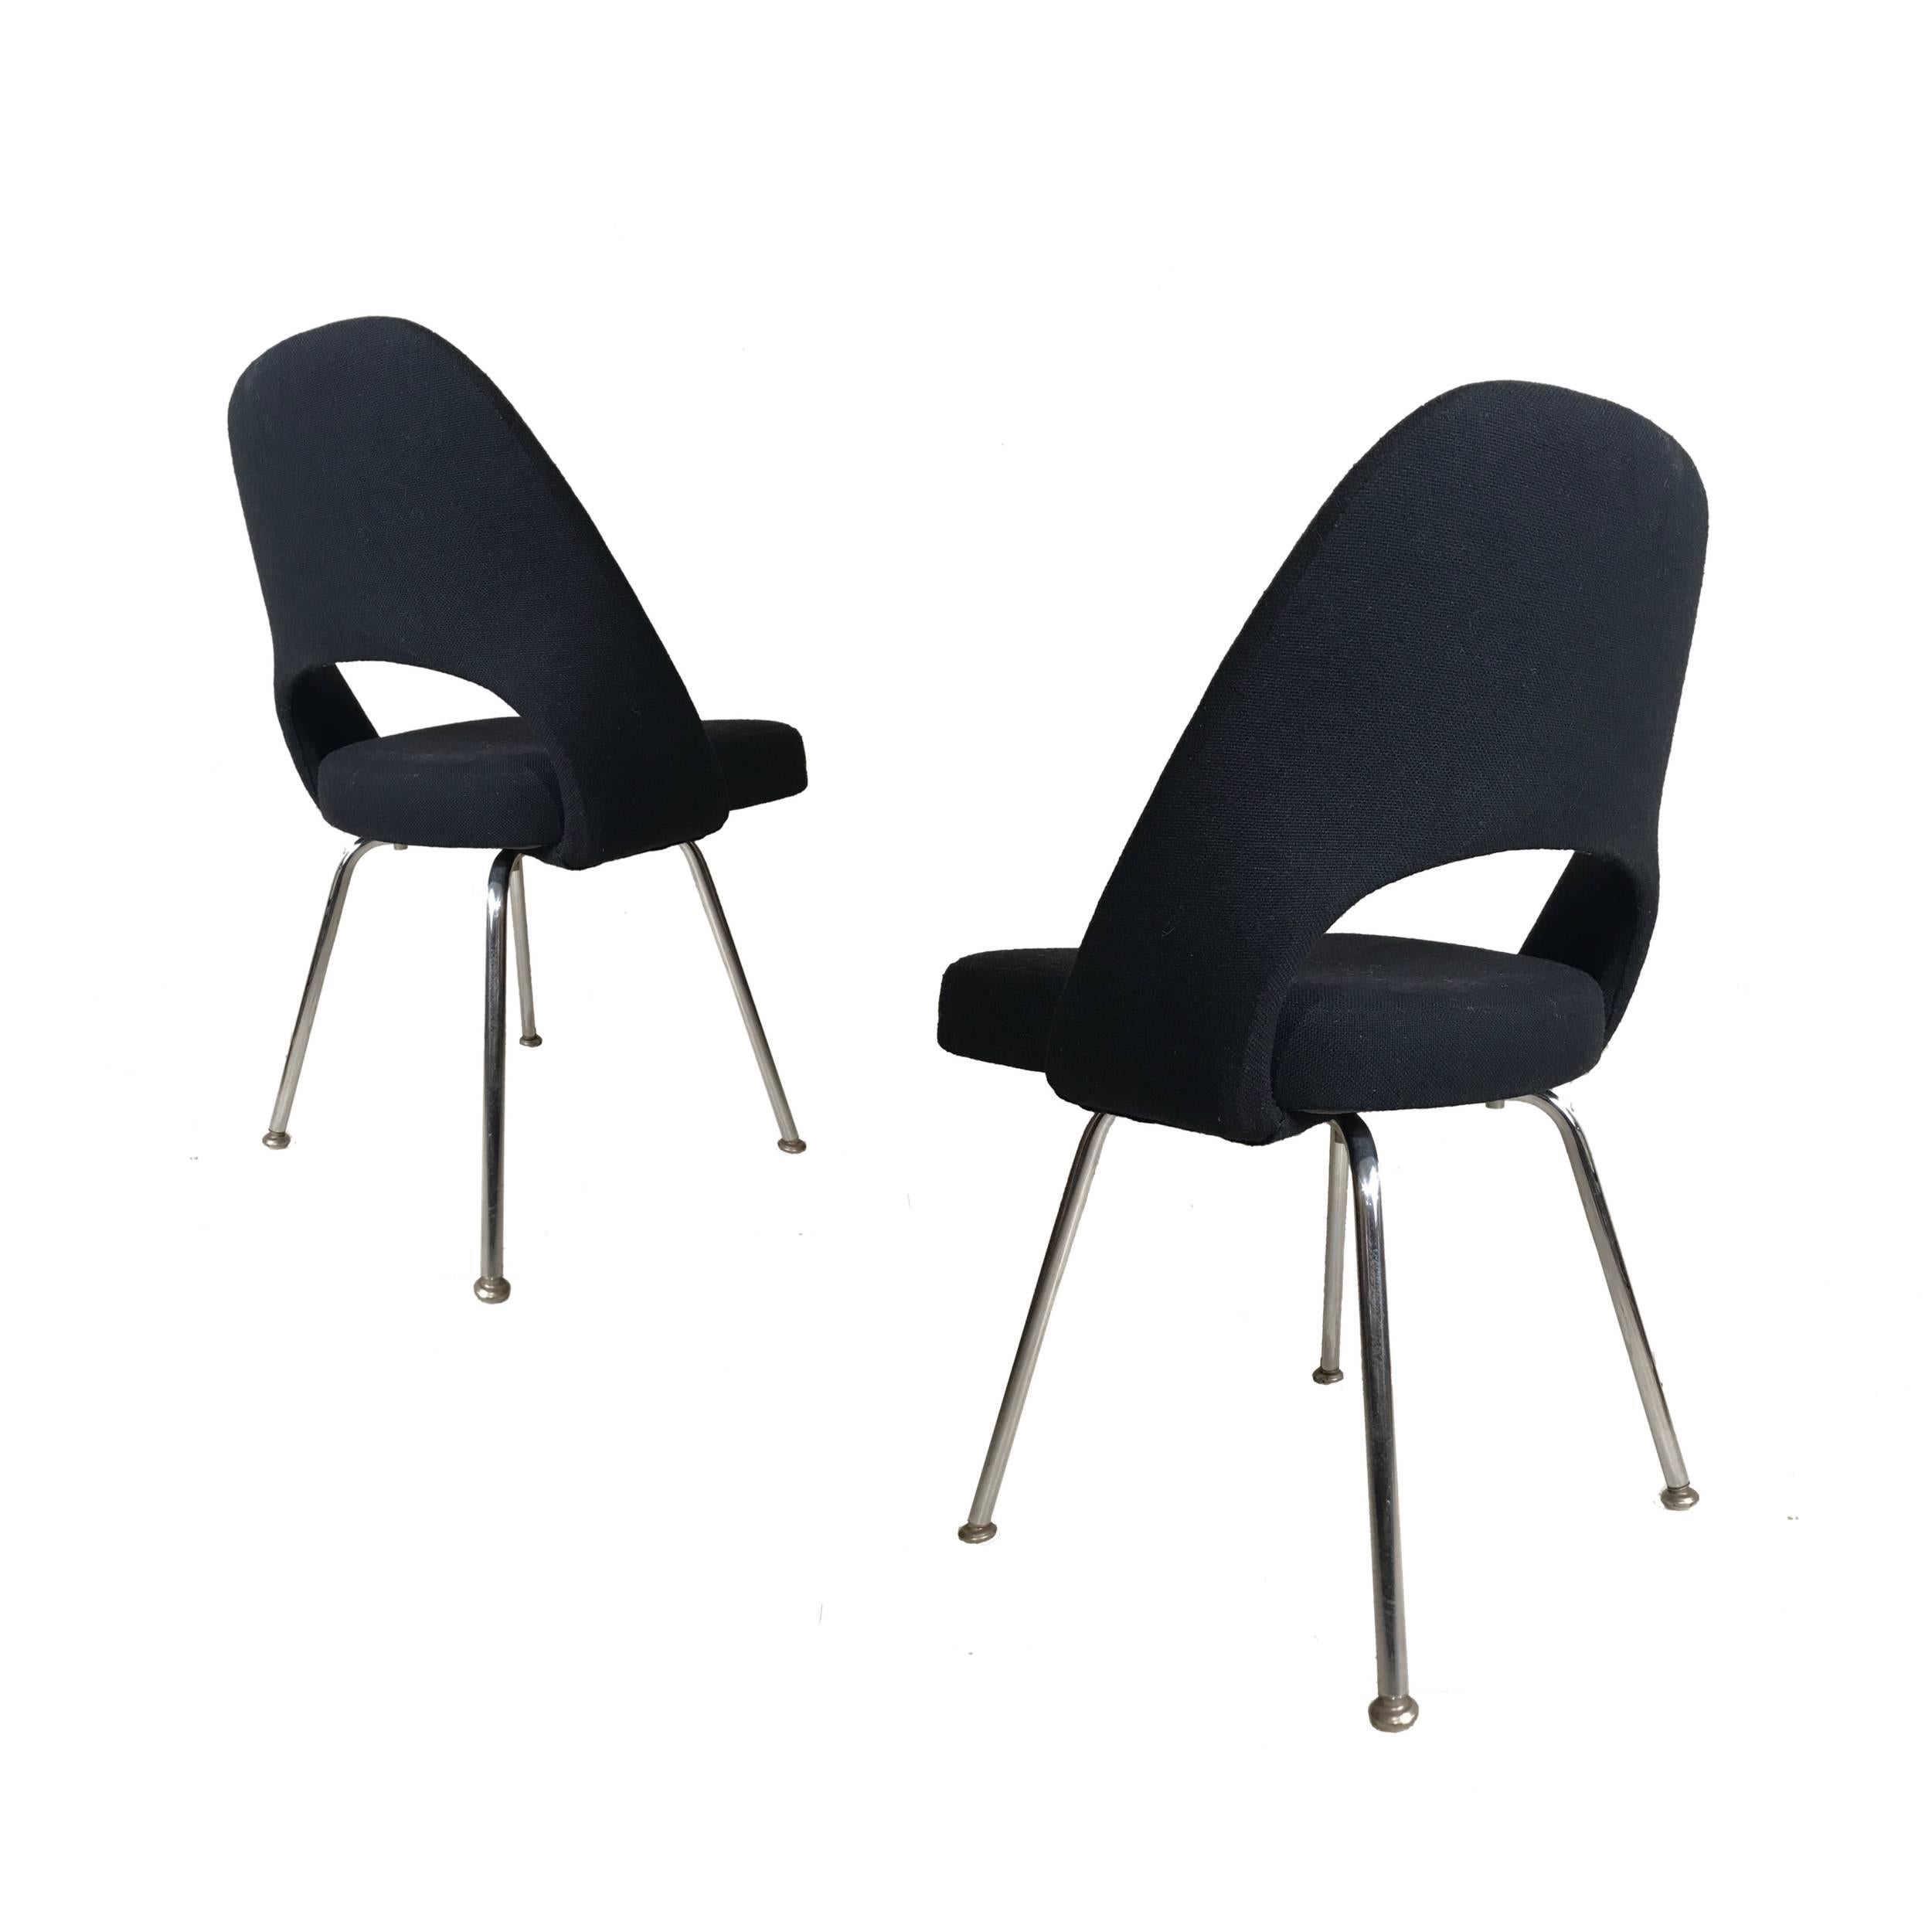 Executive side chairs designed by Eero Saarinen and manufactured by Knoll. Very good usable chairs.
We also have many armchairs available in black as well as a few other colors as well. Priced per chair.